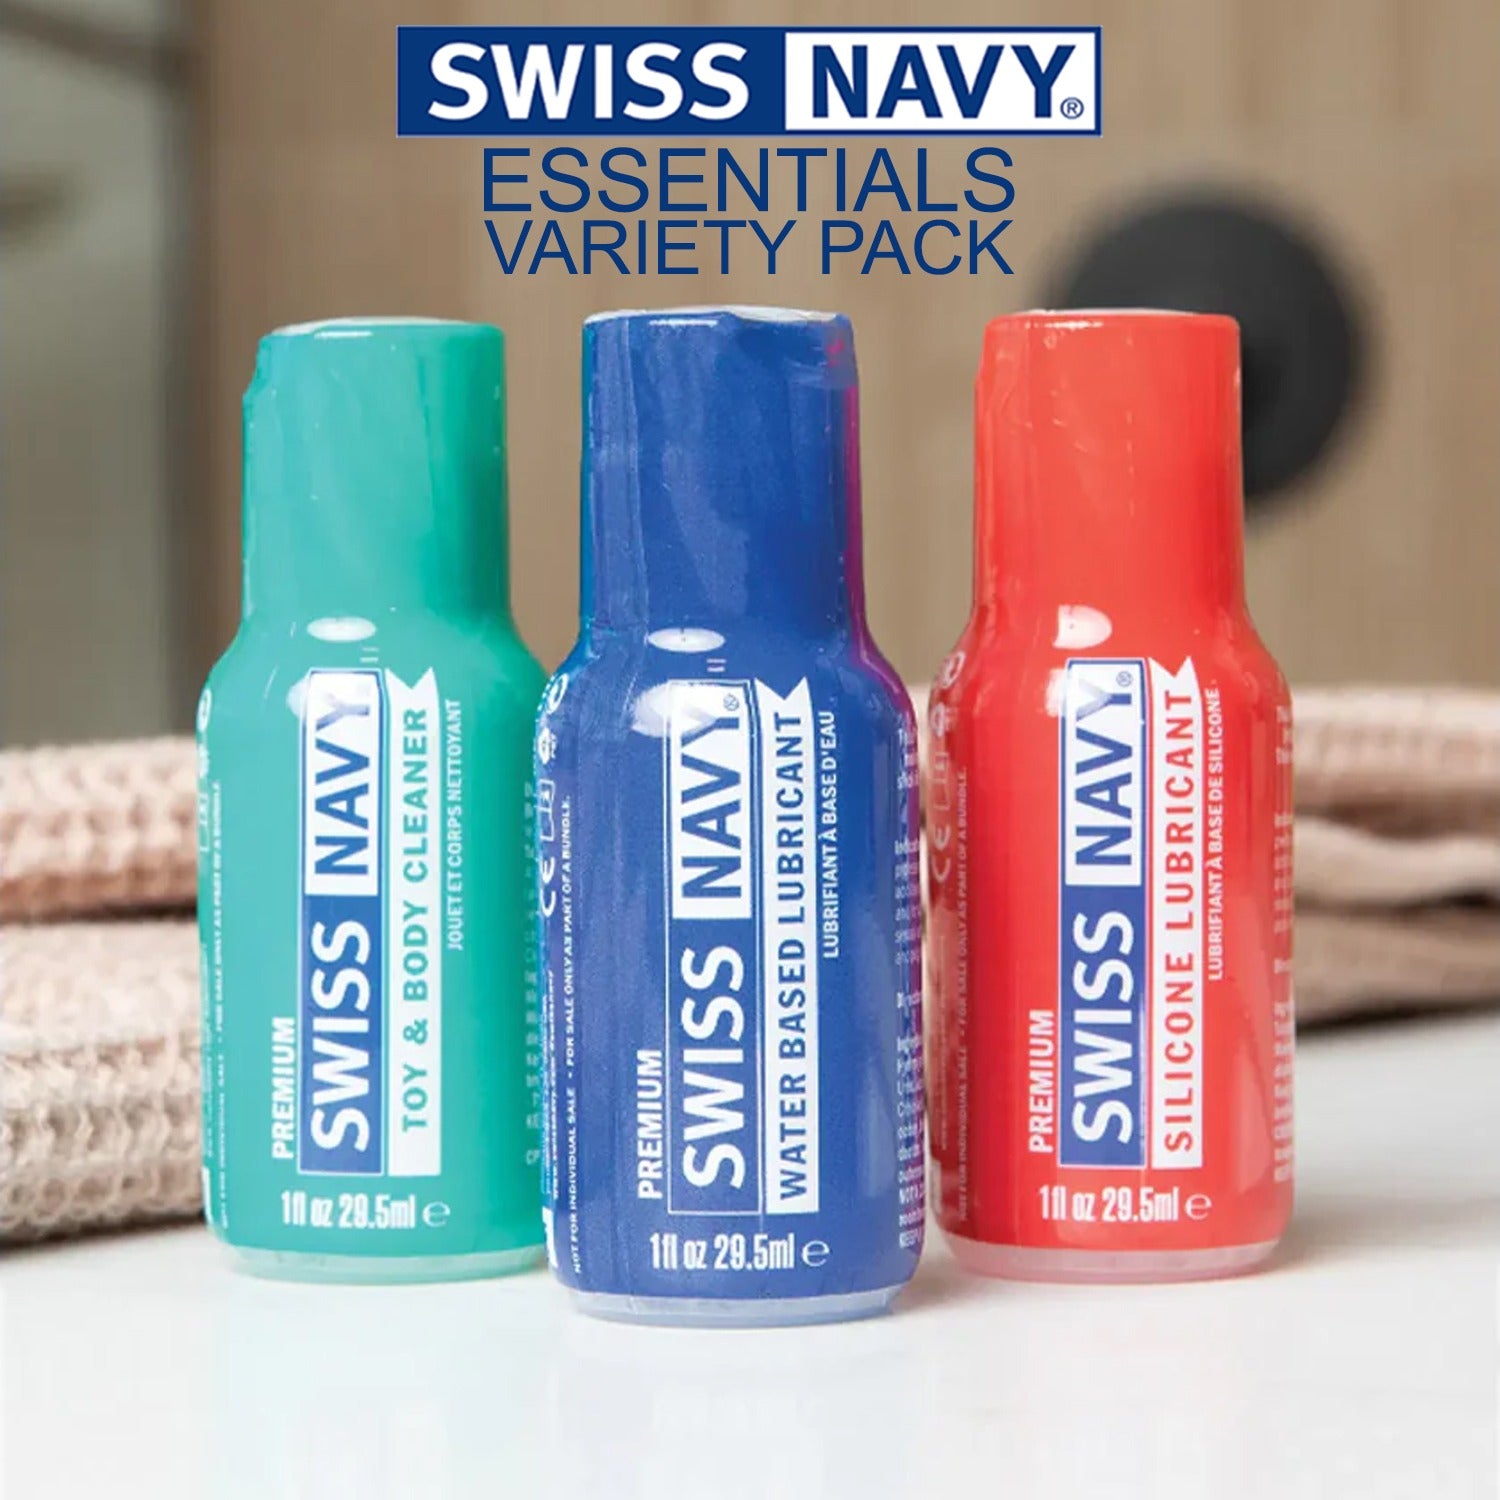 Premium Swiss Navy Toy & Body Cleaner, Premium Swiss Navy Water Based Lubricant, and Premium Swiss Navy Silicone Lubricant 1 fl oz / 29.5 ml bottles standing beside each other. On the top is the Swiss Navy logo, the product name: Essentials Variety Pack.